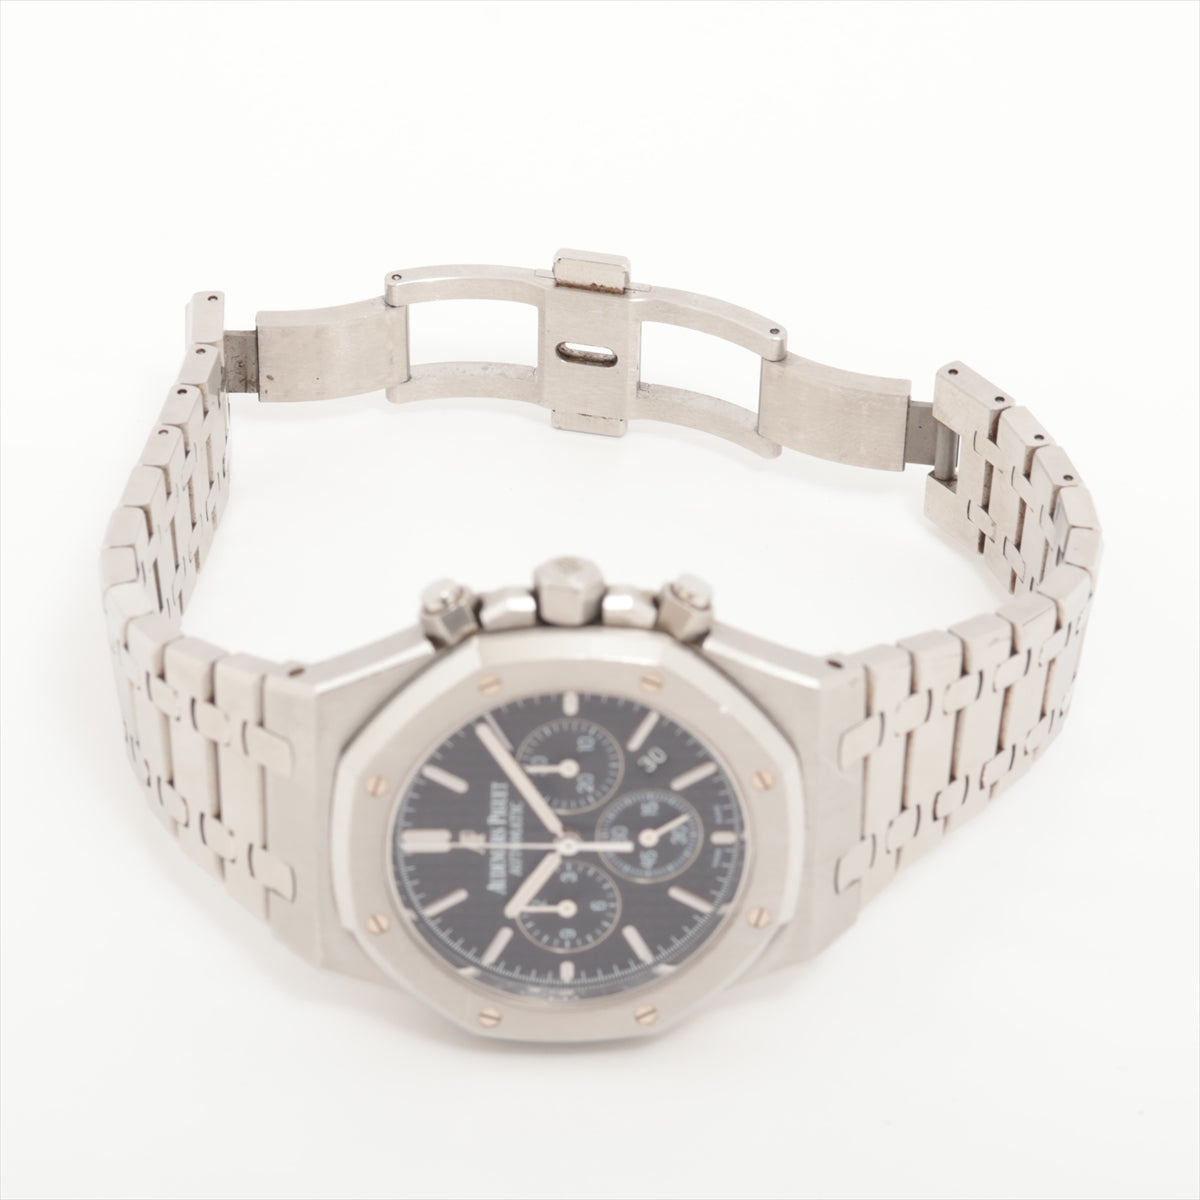 Audemars Piguet Royal Oak Chronograph 26320ST.OO.1220ST.01 SS AT Black Dial 2 Extra Links Our OH paid